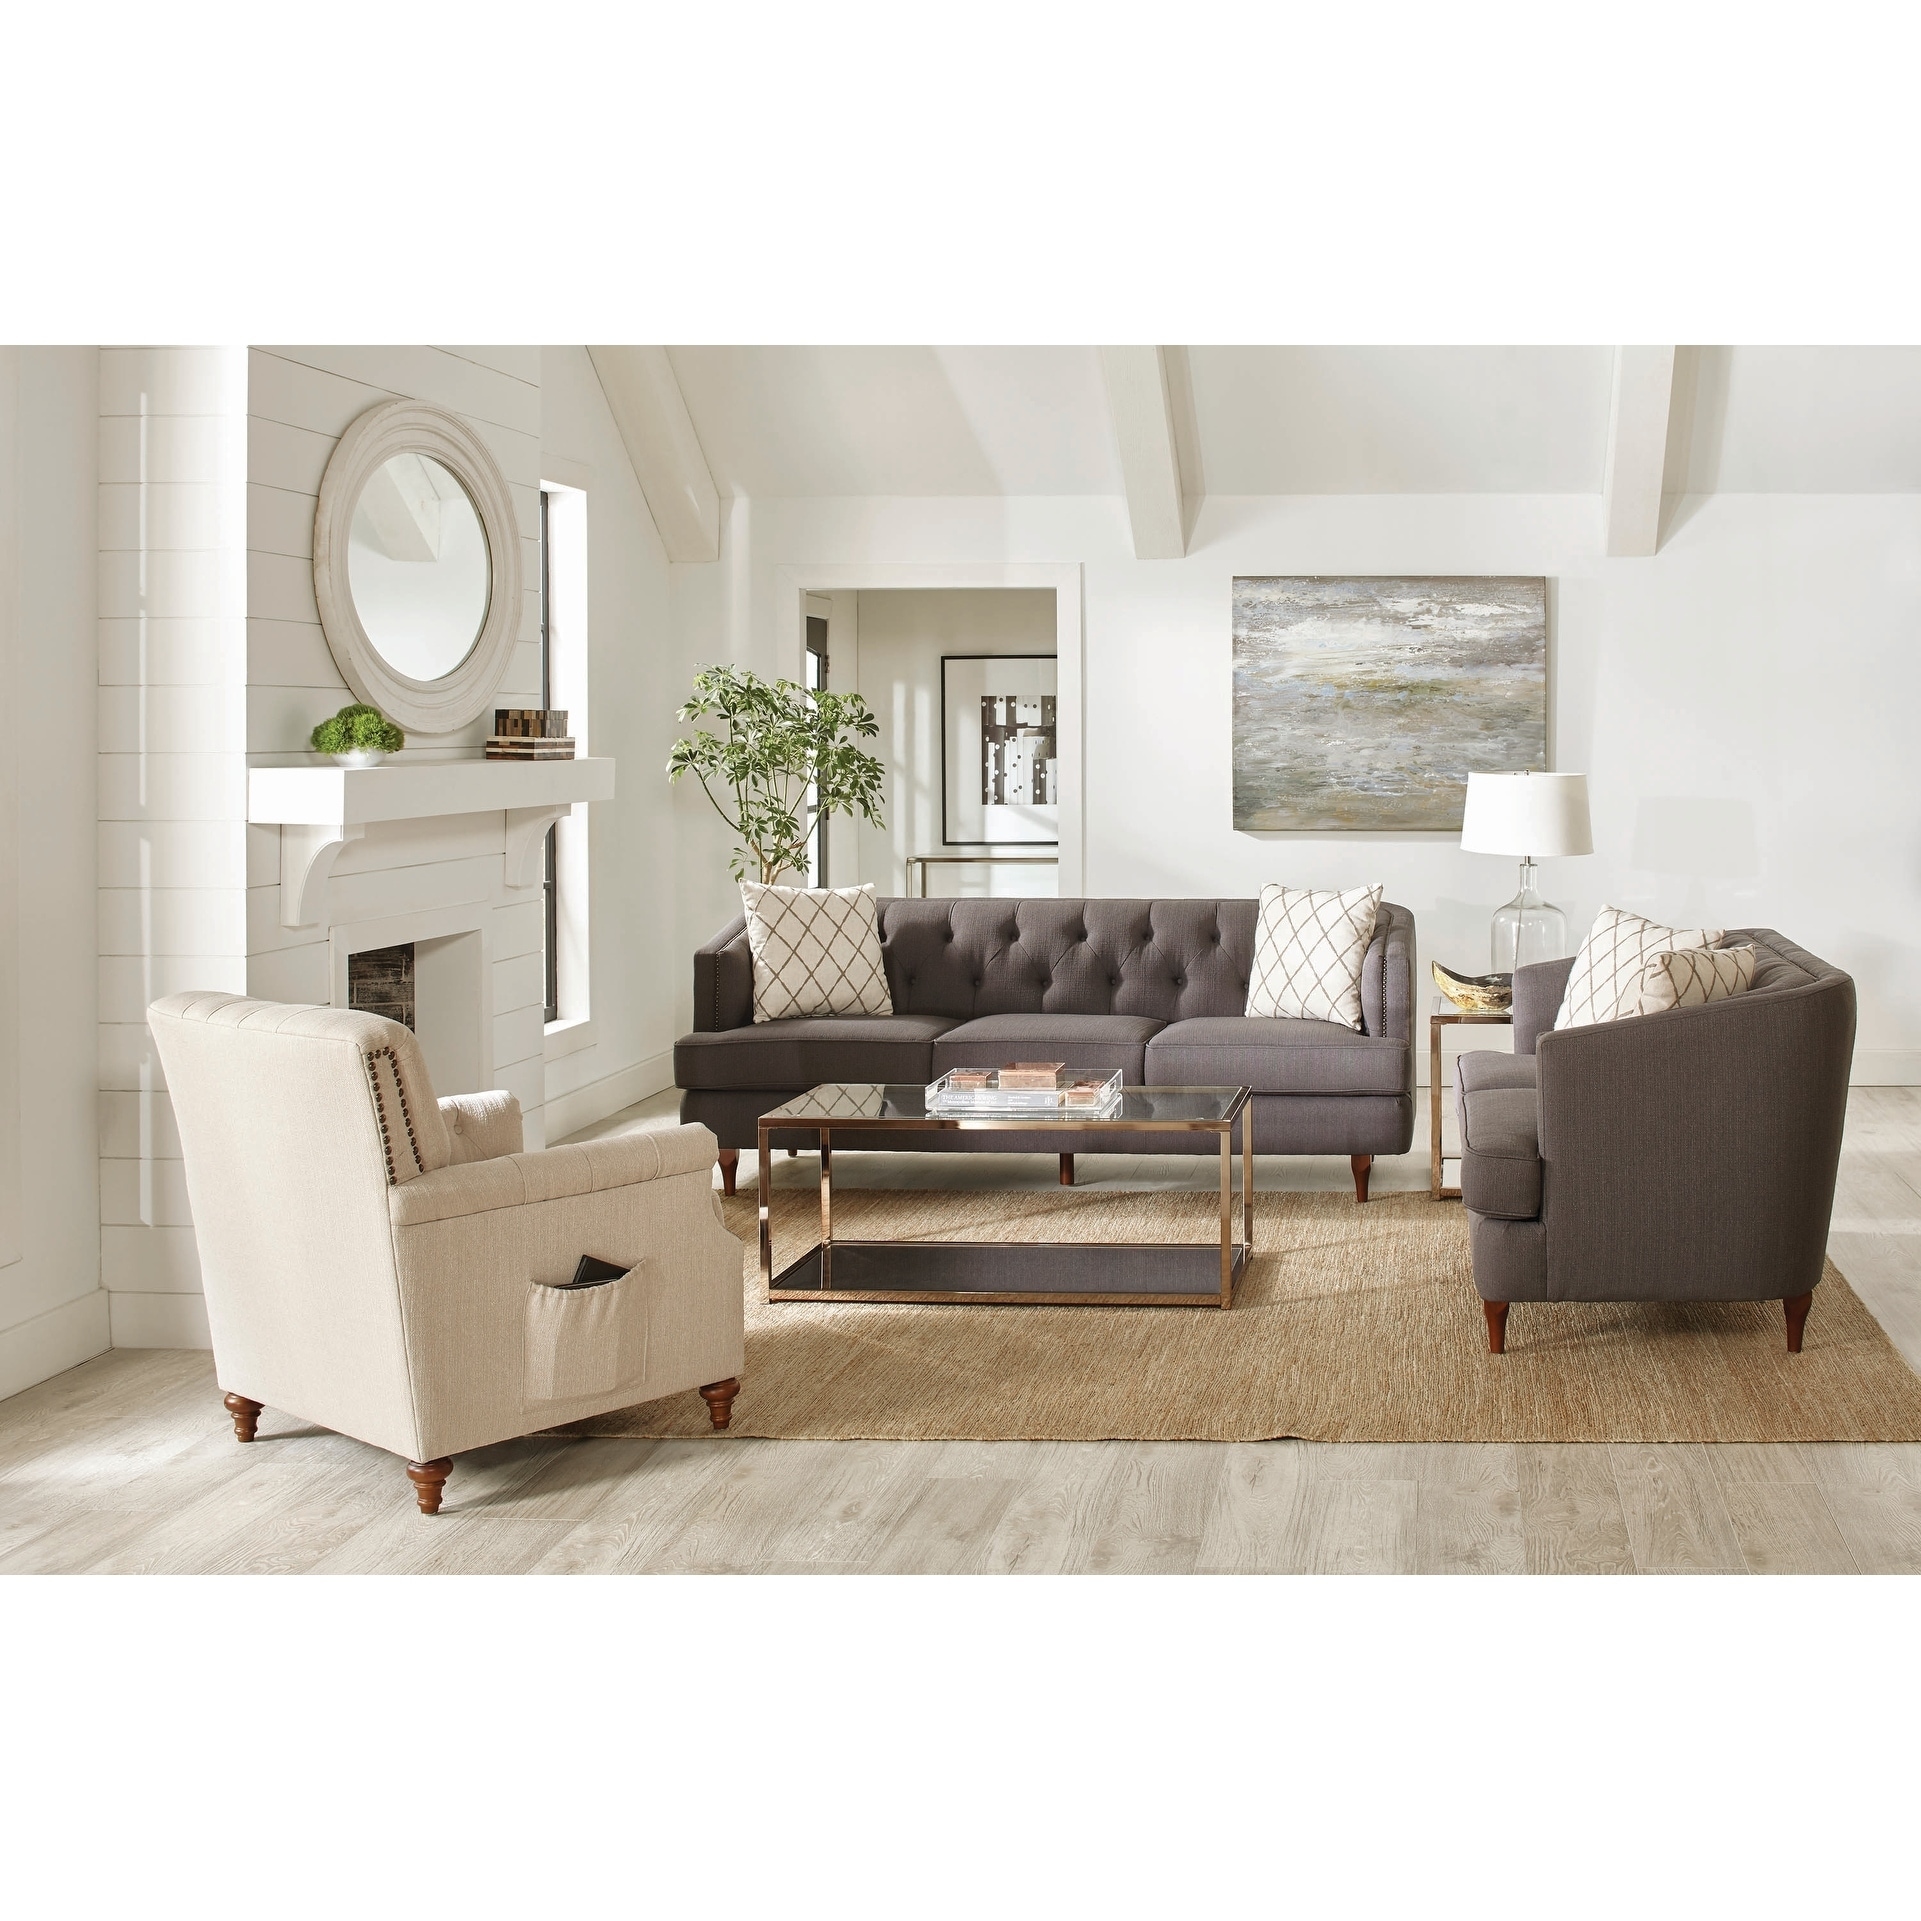 Shelby Grey And Beige Upholstered 3 Piece Living Room Sets On Sale Overstock 29358209